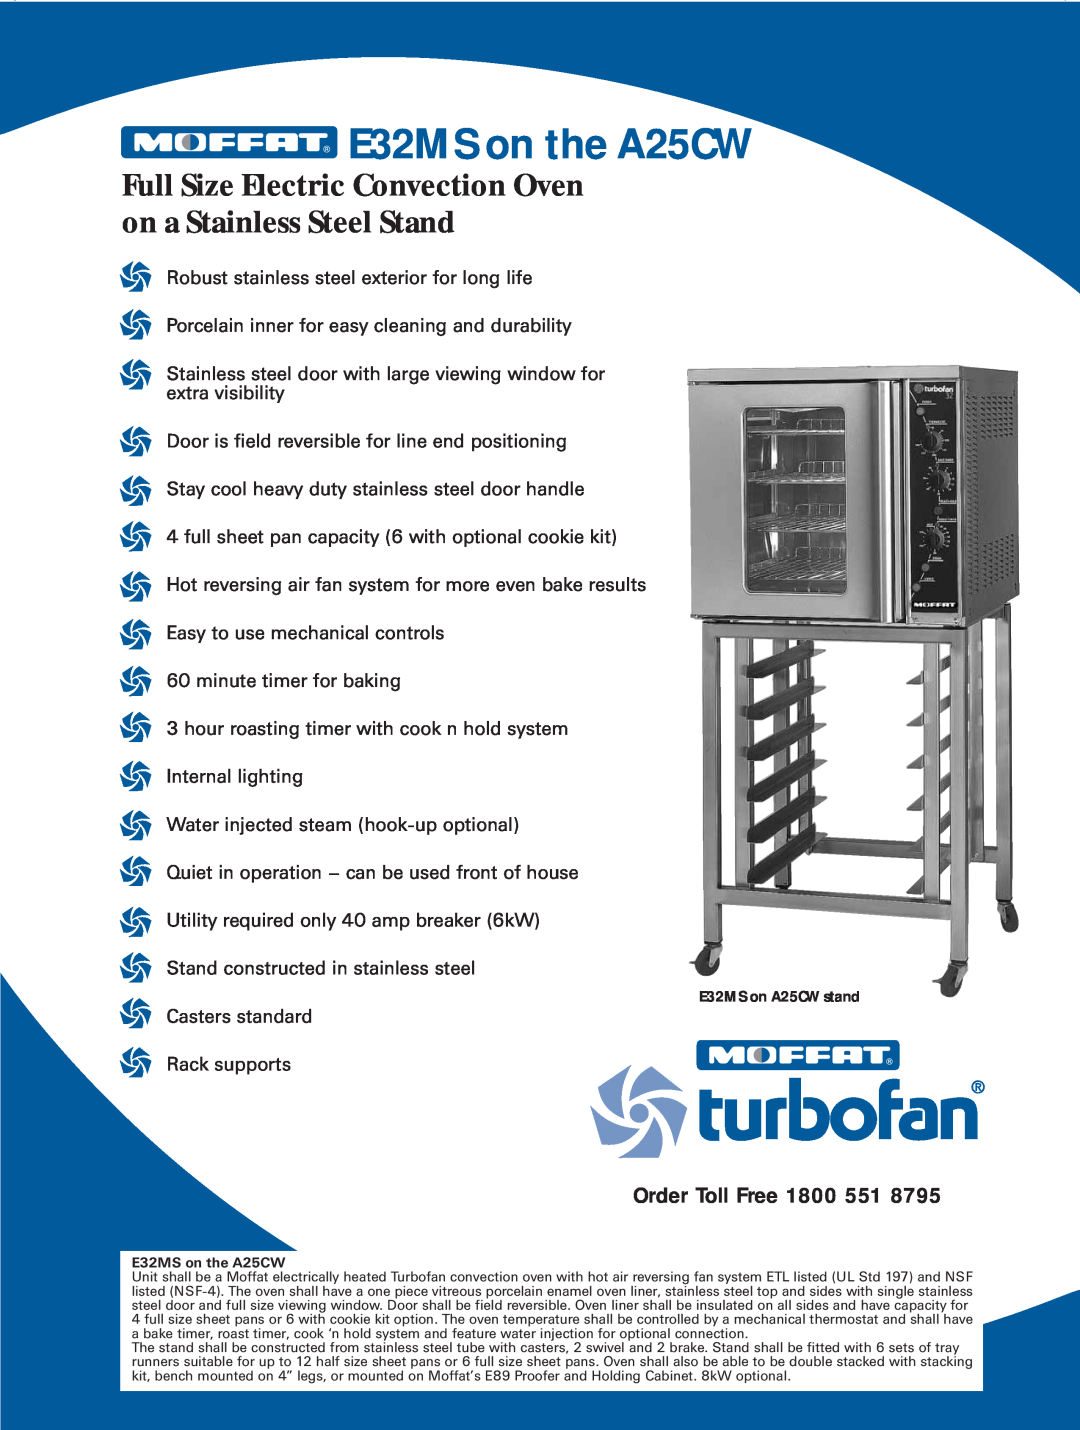 Moffat manual E32MS on the A25CW, Full Size Electric Convection Oven on a Stainless Steel Stand, Order Toll Free 